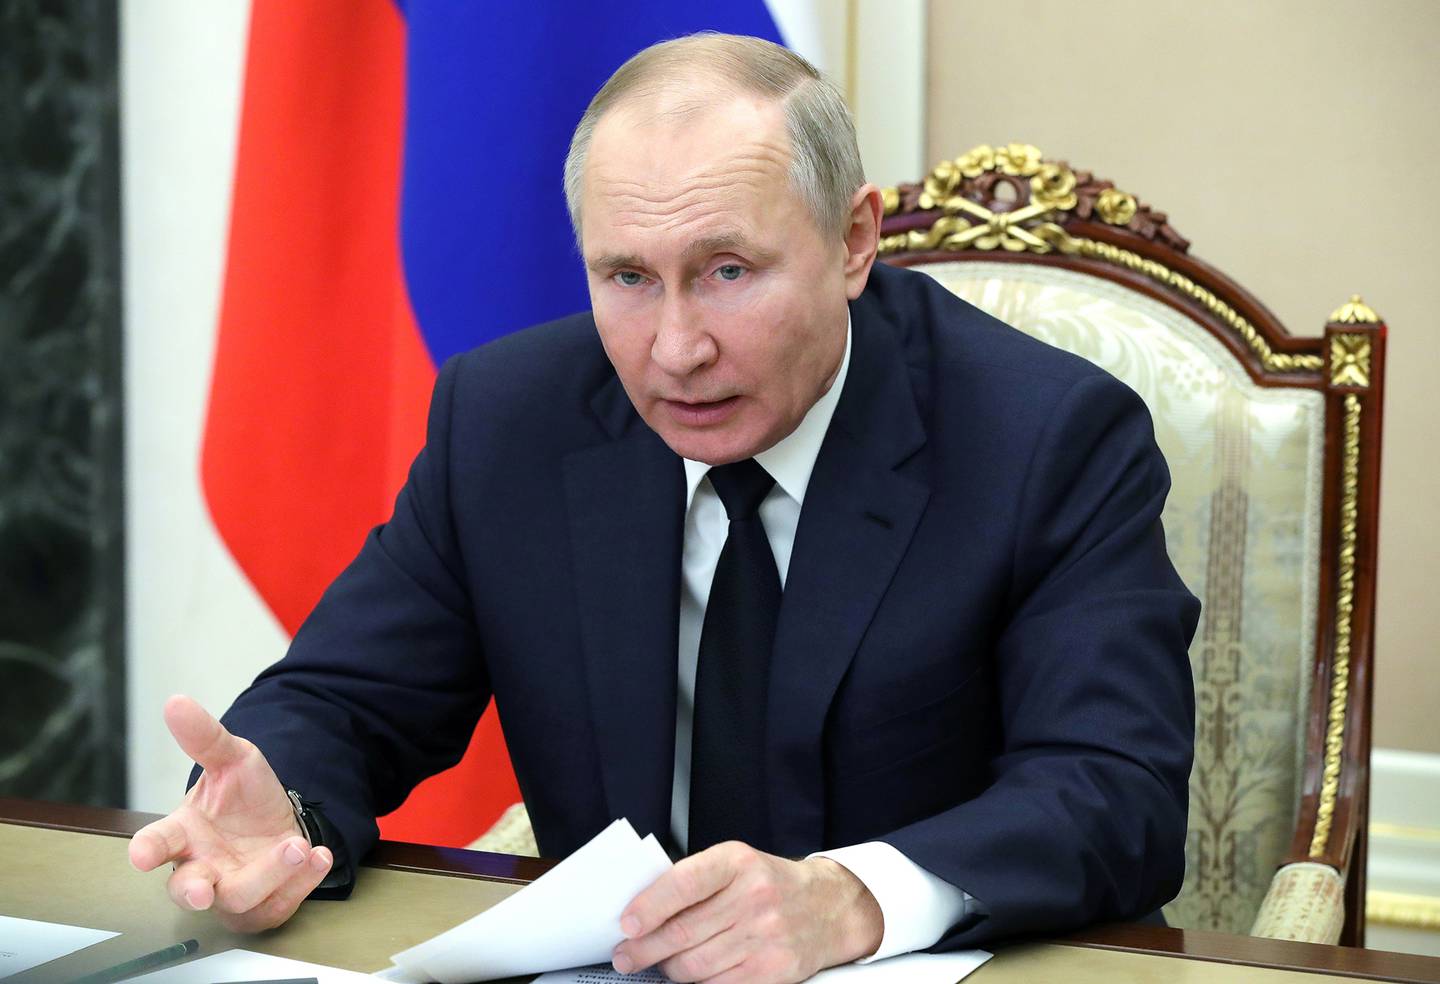 Russian President Vladimir Putin leads a meeting via video conference in Moscow on Feb. 1, 2021.